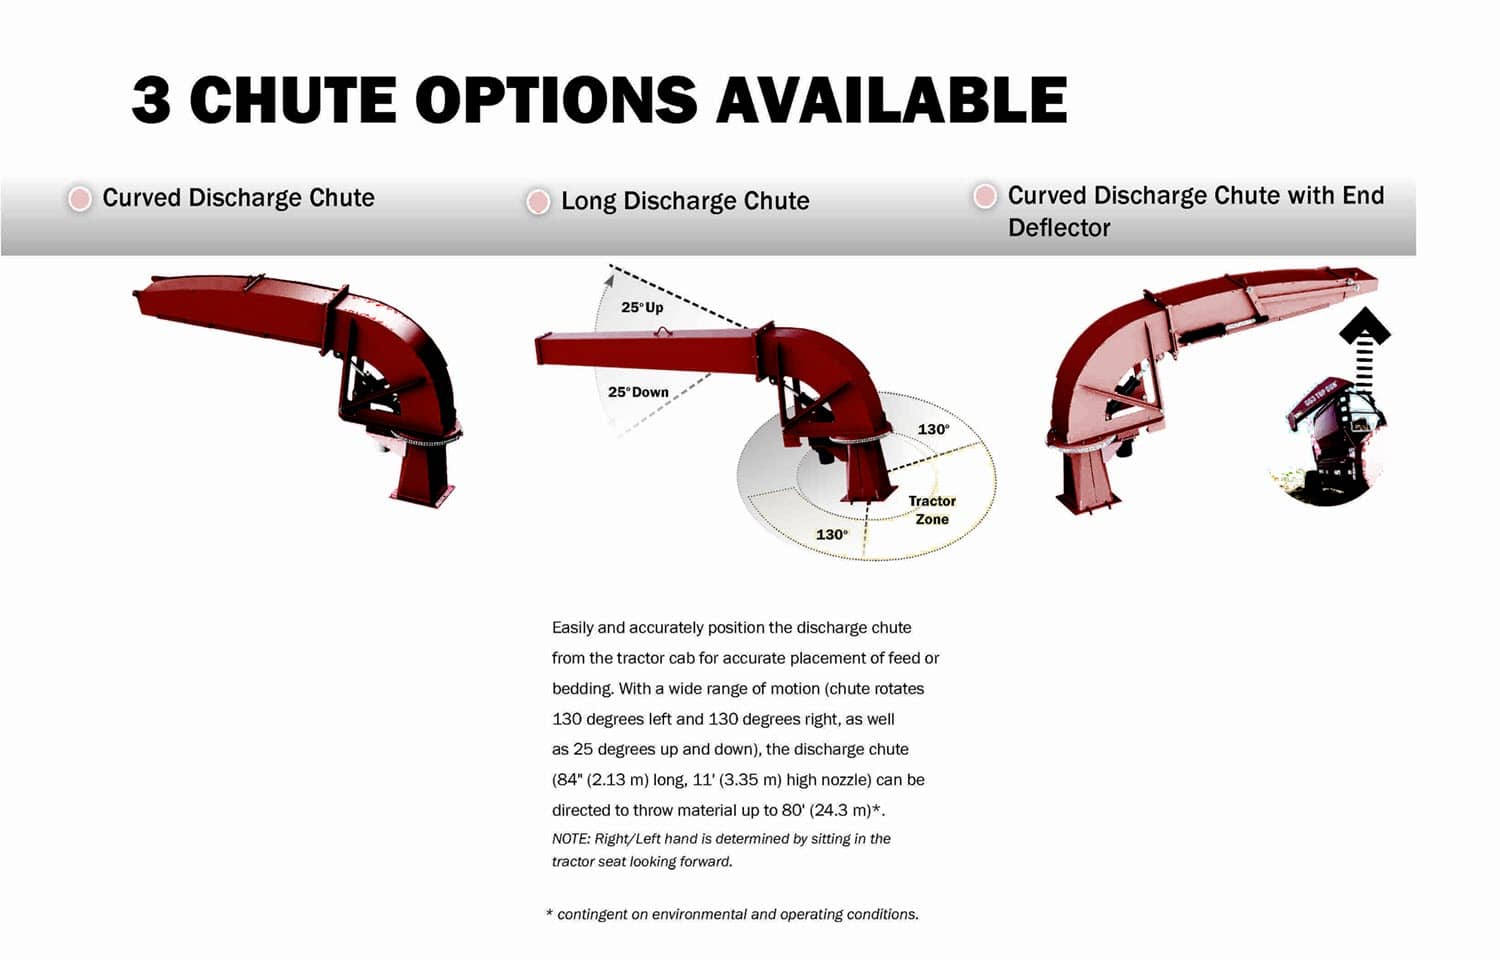 3 Chute Options Available